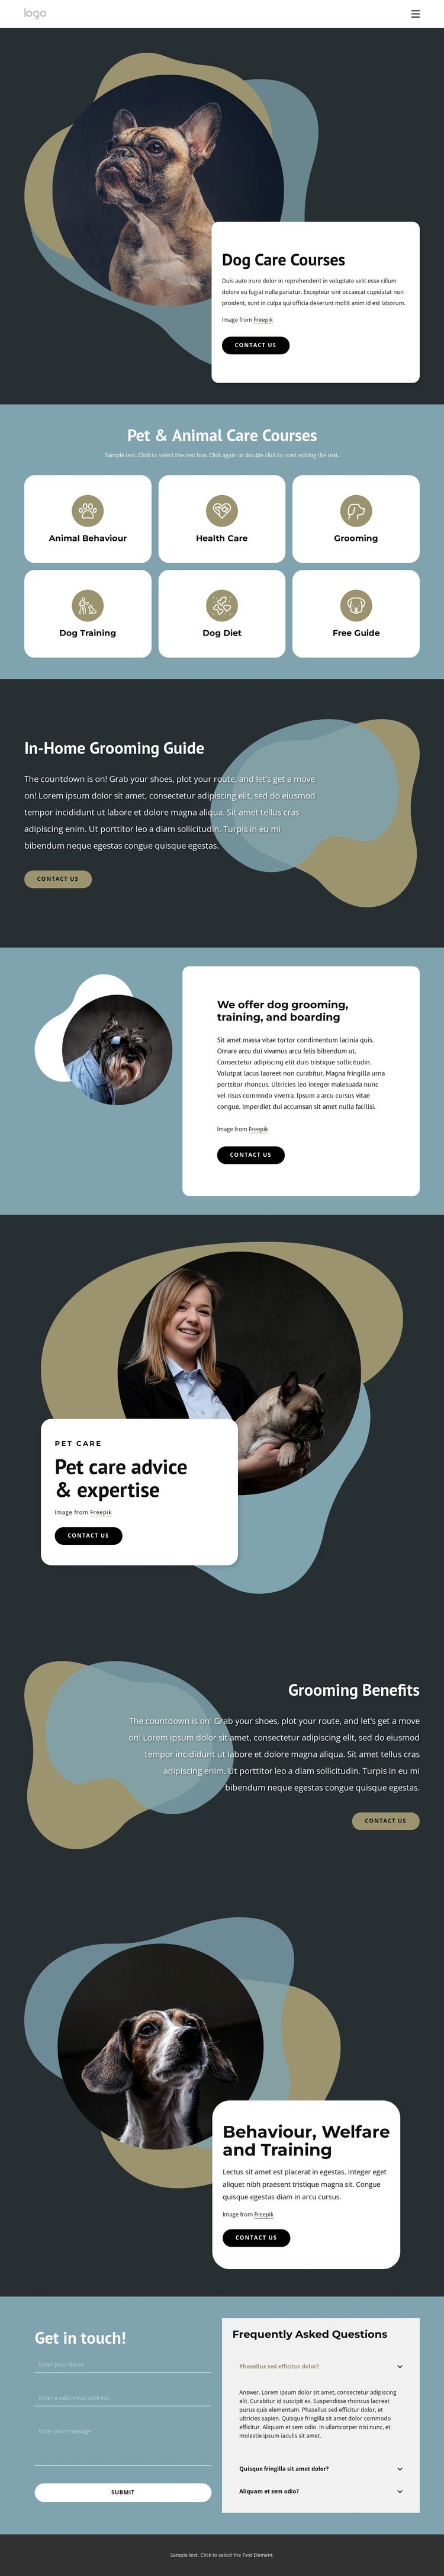 Dog care courses Homepage Design